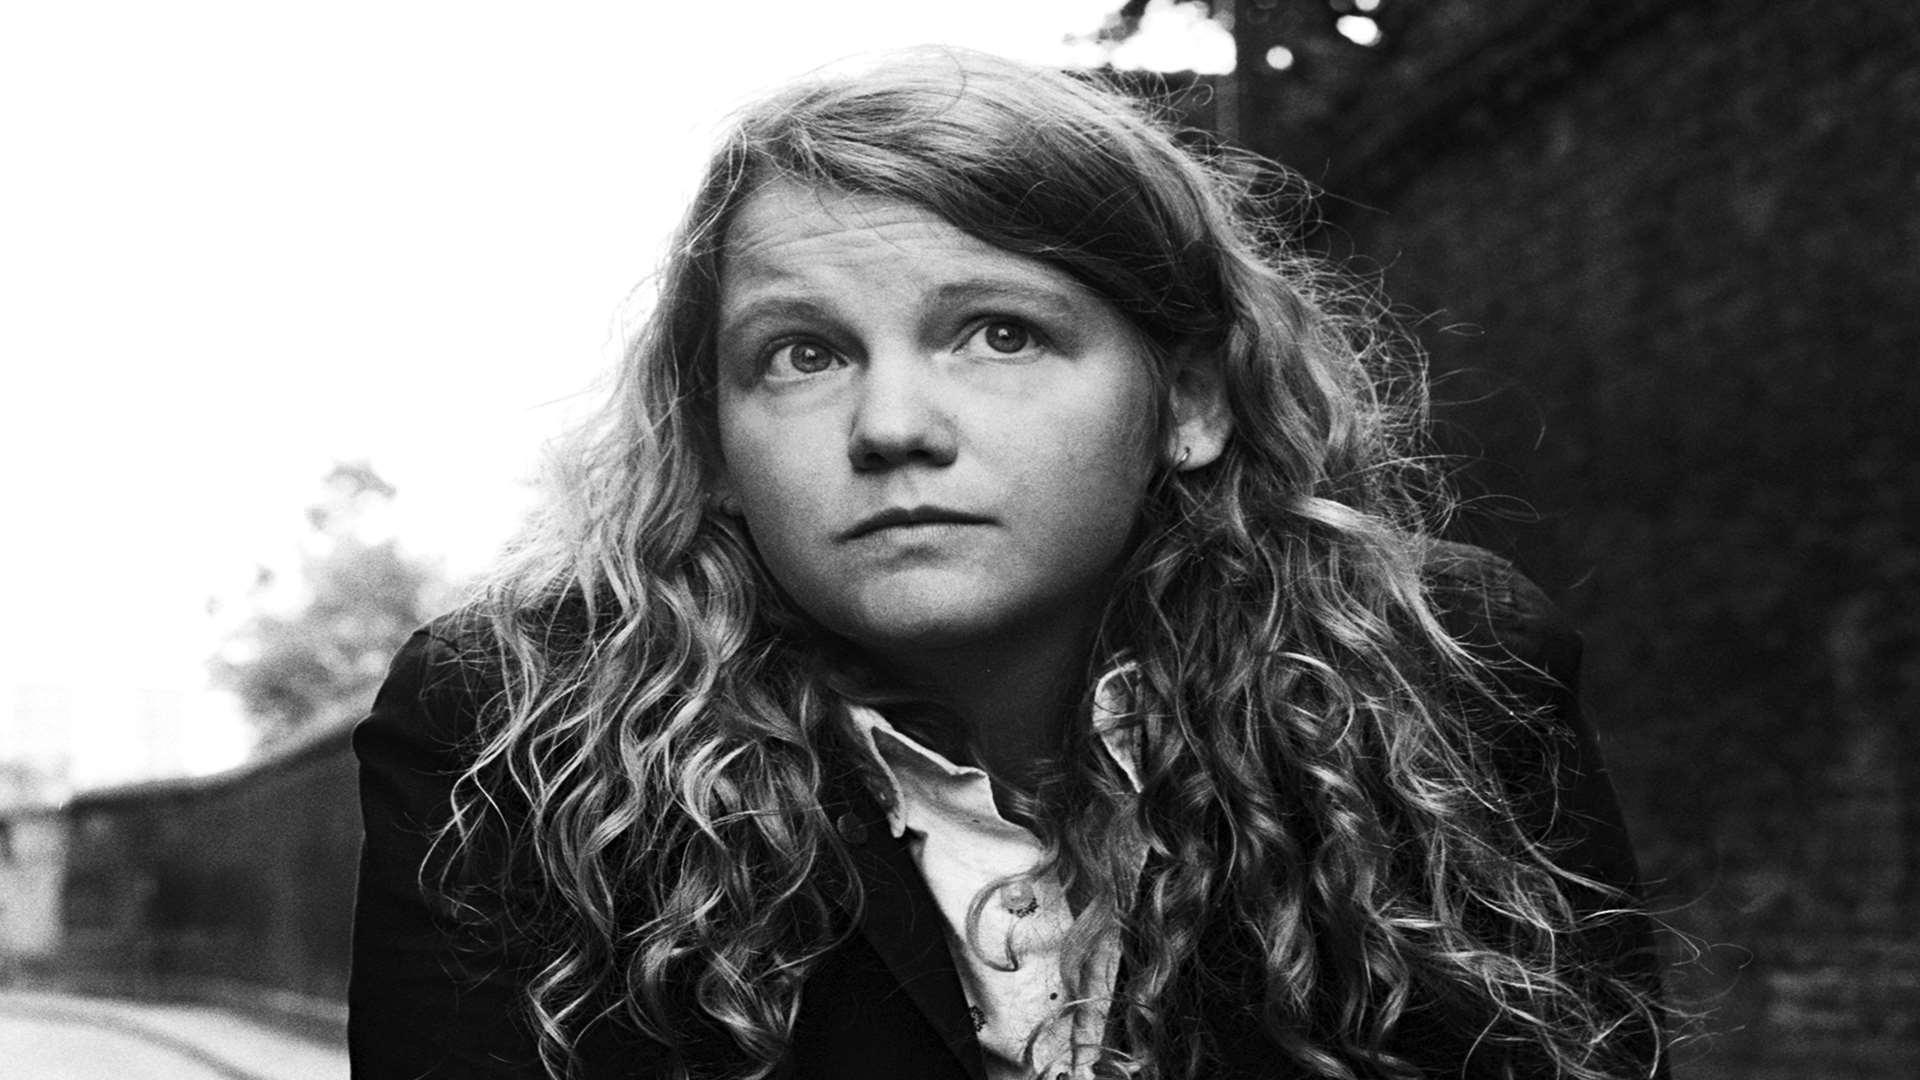 Kate Tempest will be at LeeFest